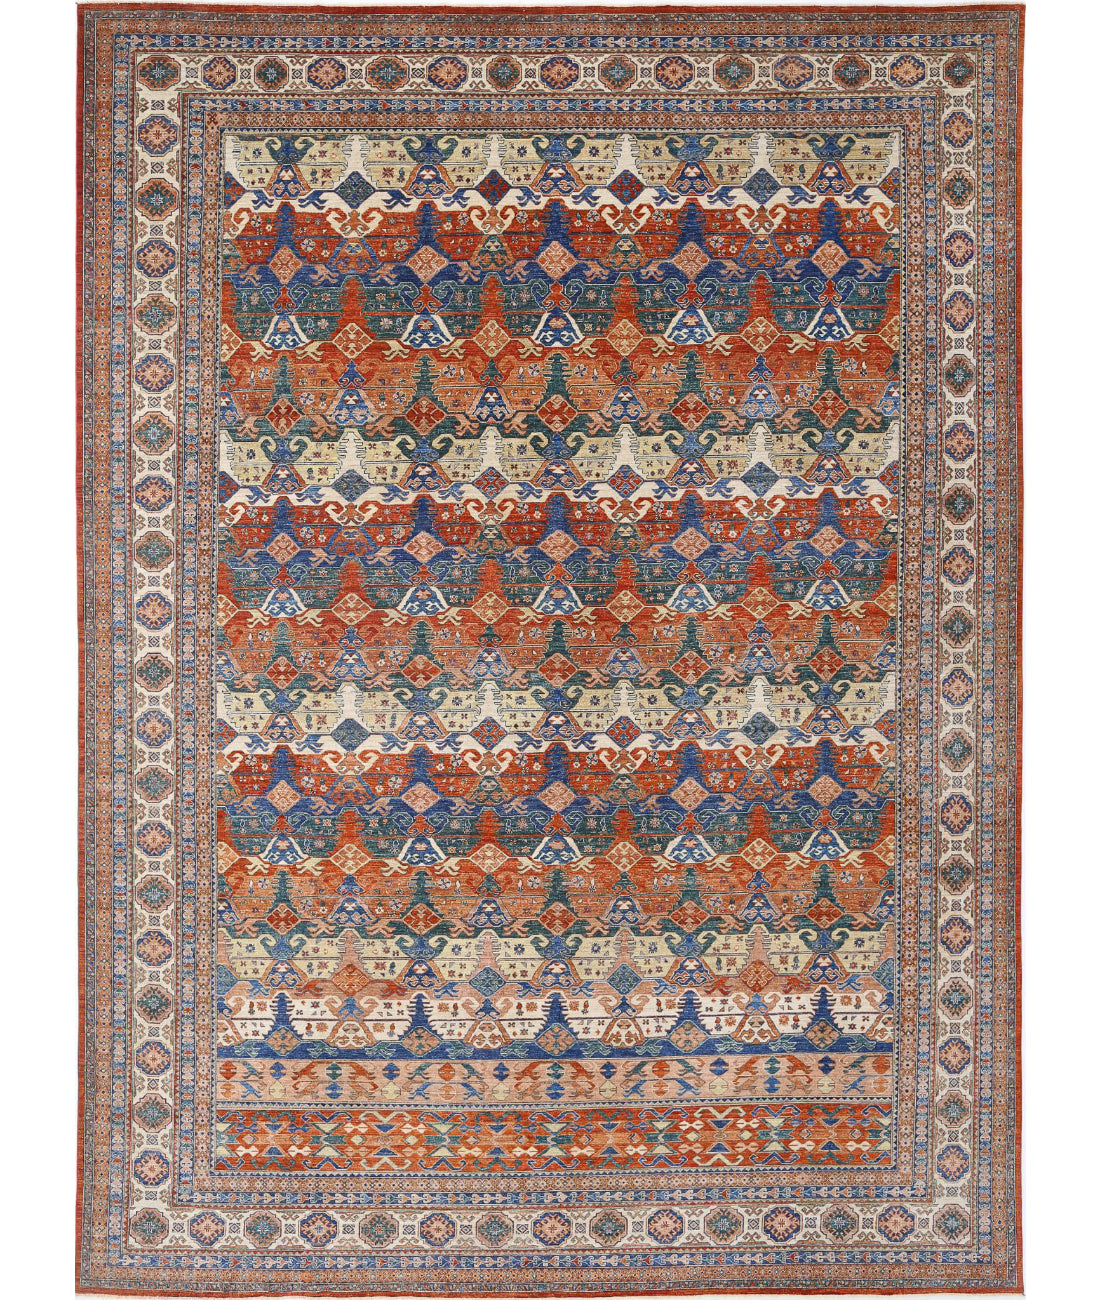 Hand Knotted Nomadic Caucasian Humna Wool Rug - 14'6'' x 19'2'' 14'6'' x 19'2'' (435 X 575) / Multi / Ivory